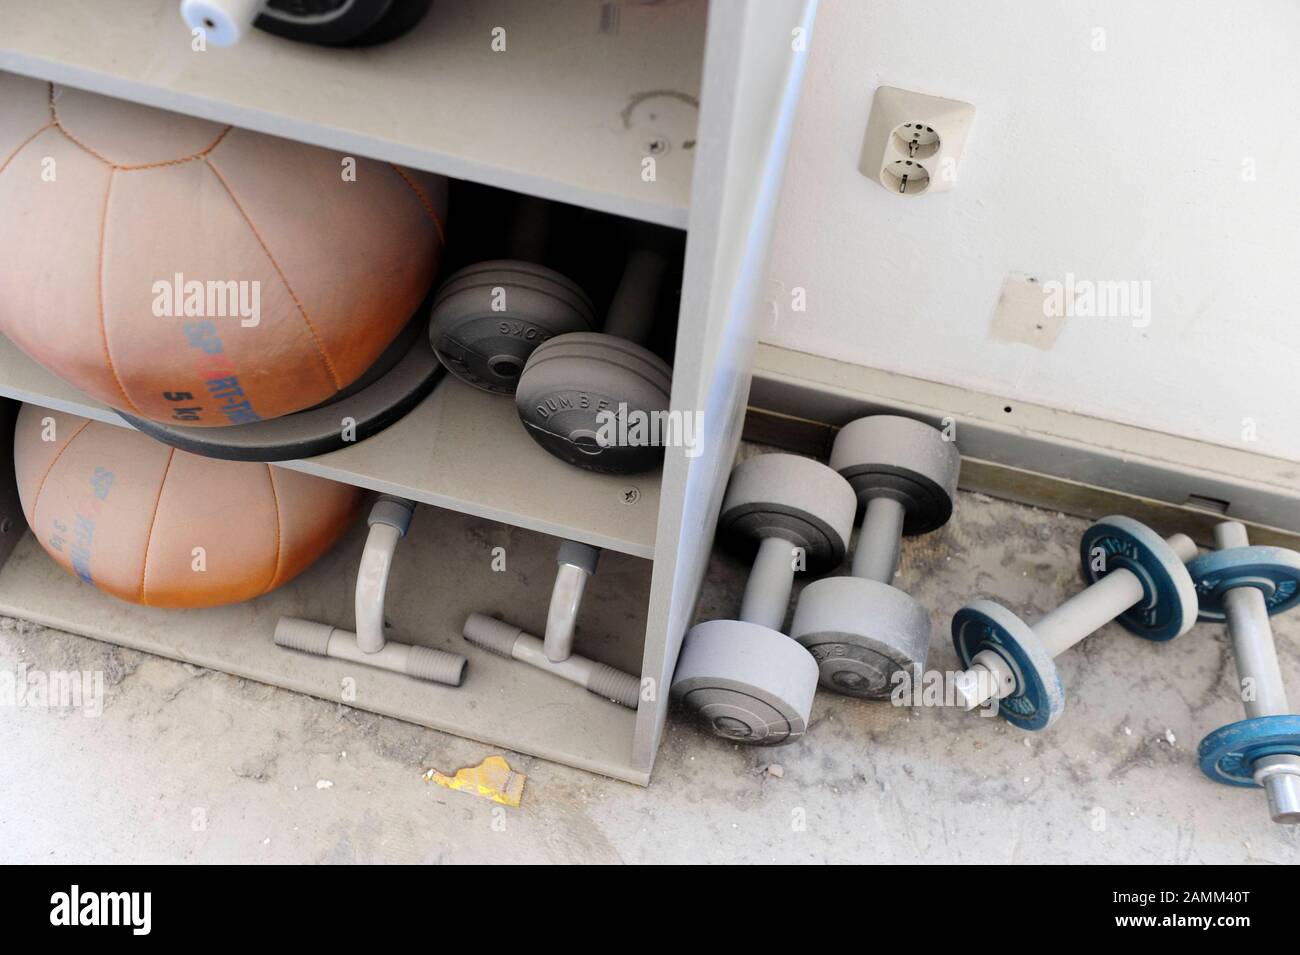 The boxing department of the Stadtwerke München sports club at Wurzerstraße 7 is being renovated. The department launched the 'Sport-Chance' project, which aims to give confidence to young people without prospects. The picture shows dumbbells, weights and medicine balls covered in dust in the training studio. [automated translation] Stock Photo